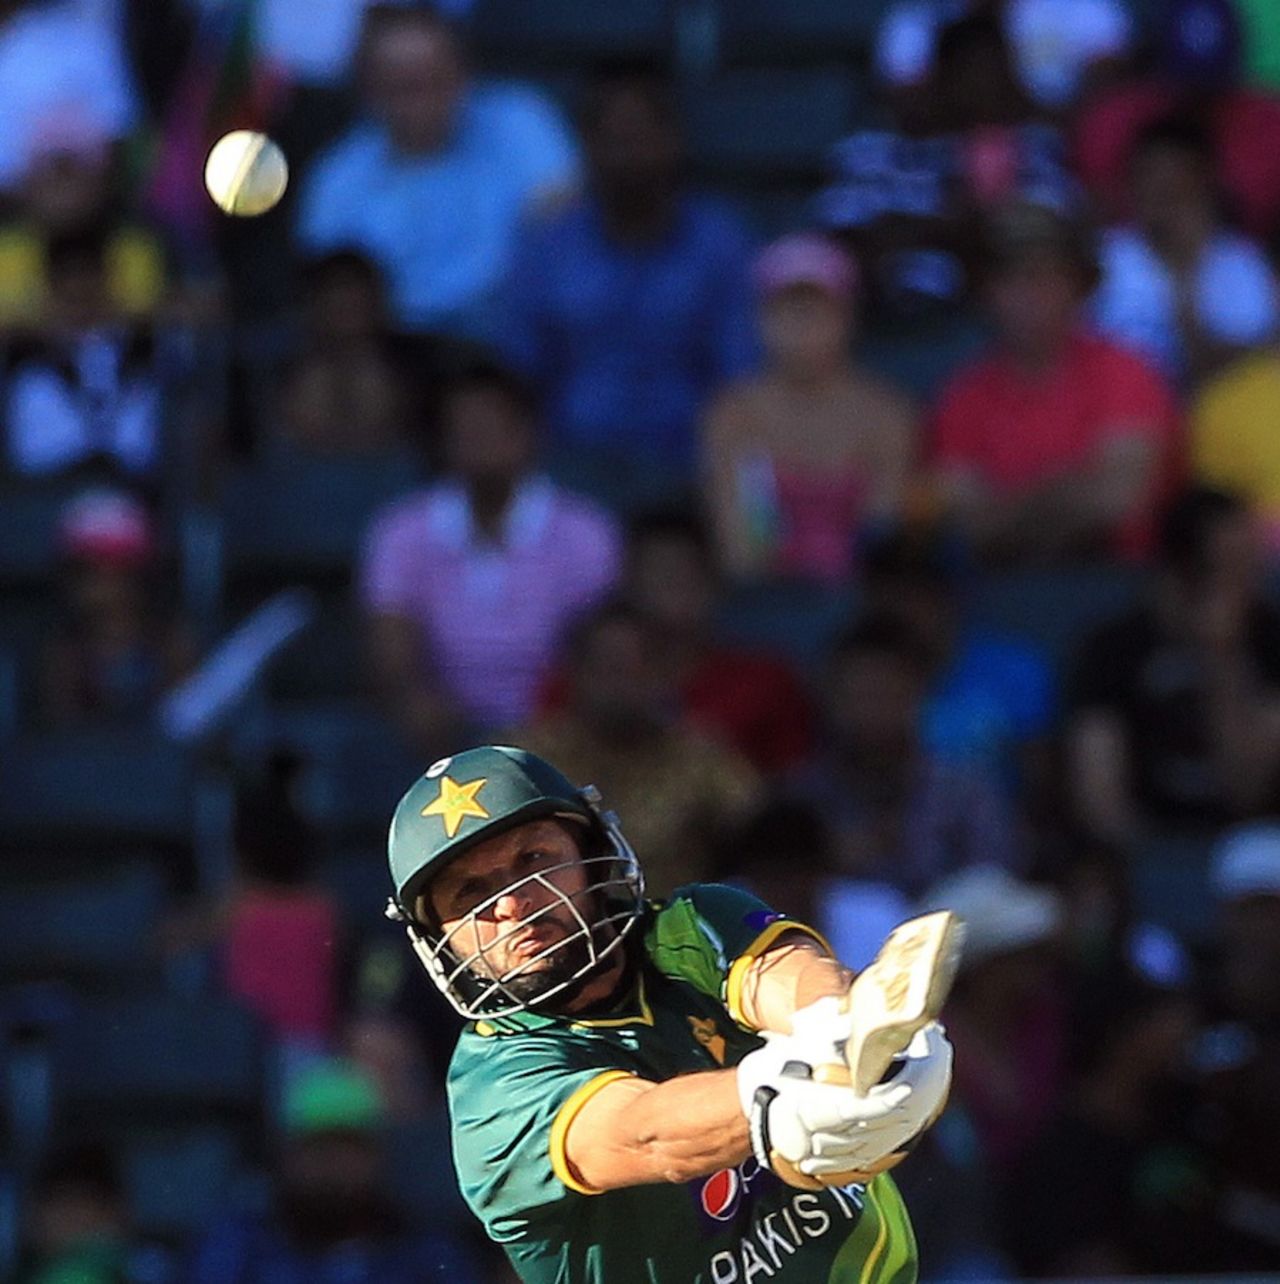 Shahid Afridi clobbers the ball during his knock of 88, South Africa v Pakistan, 3rd ODI, Johannesburg, March 17, 2013